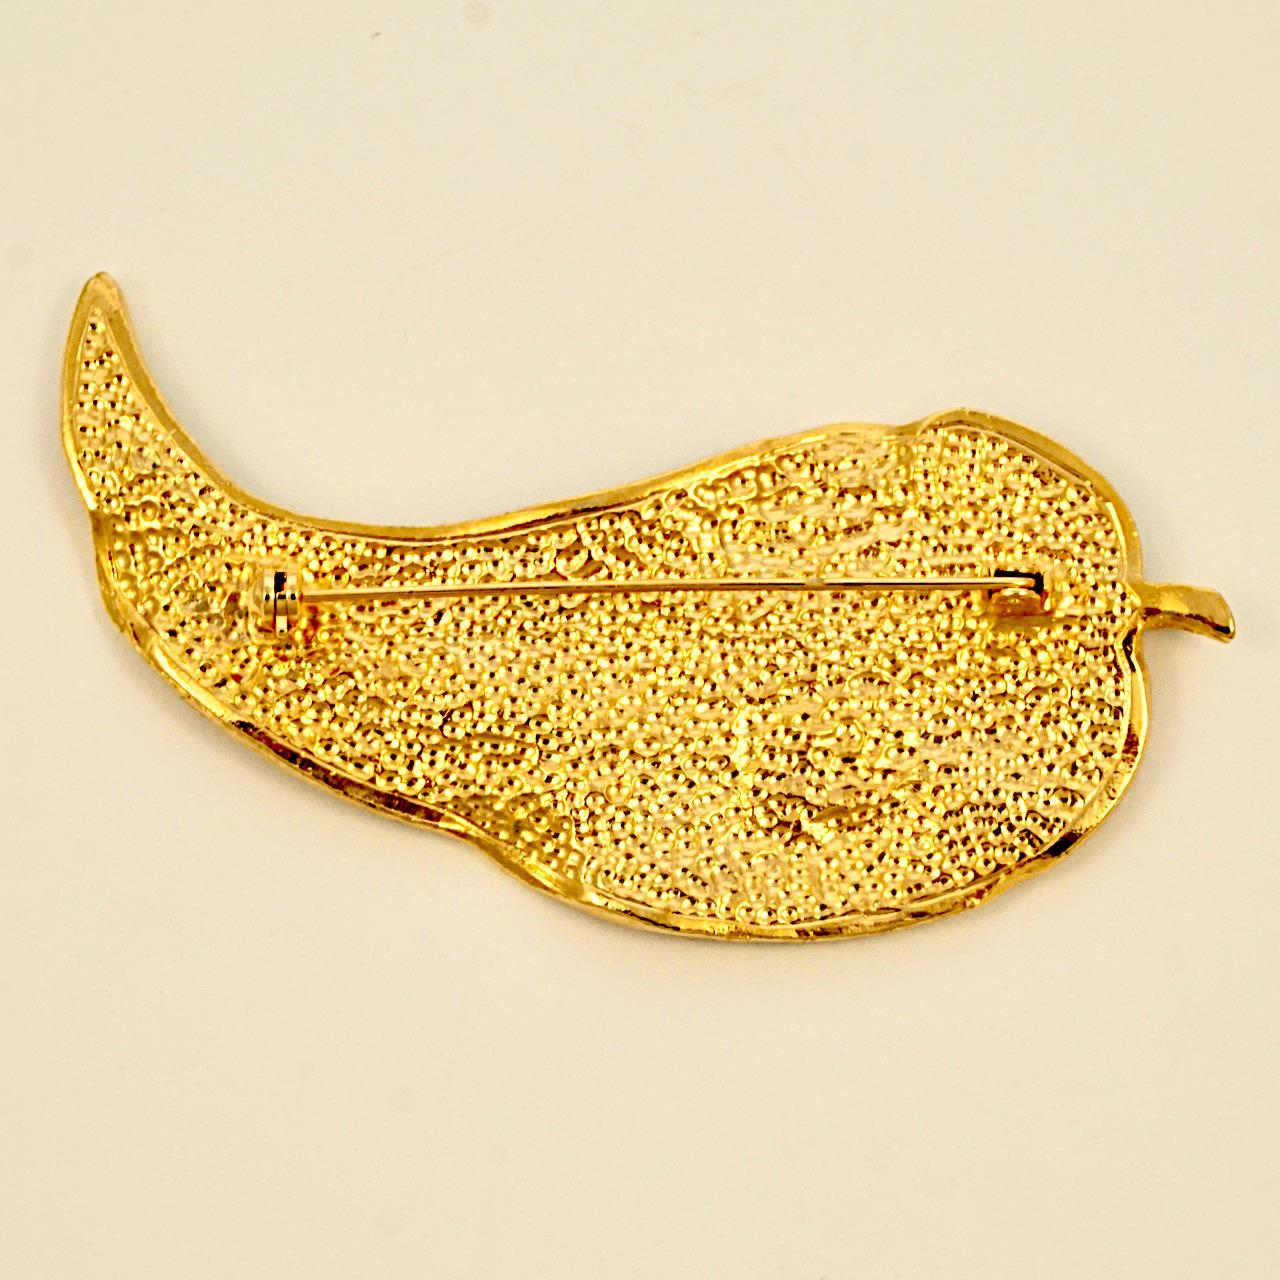 Gold Plated and Teal Enamel Leaf Brooch circa 1980s In Excellent Condition For Sale In London, GB